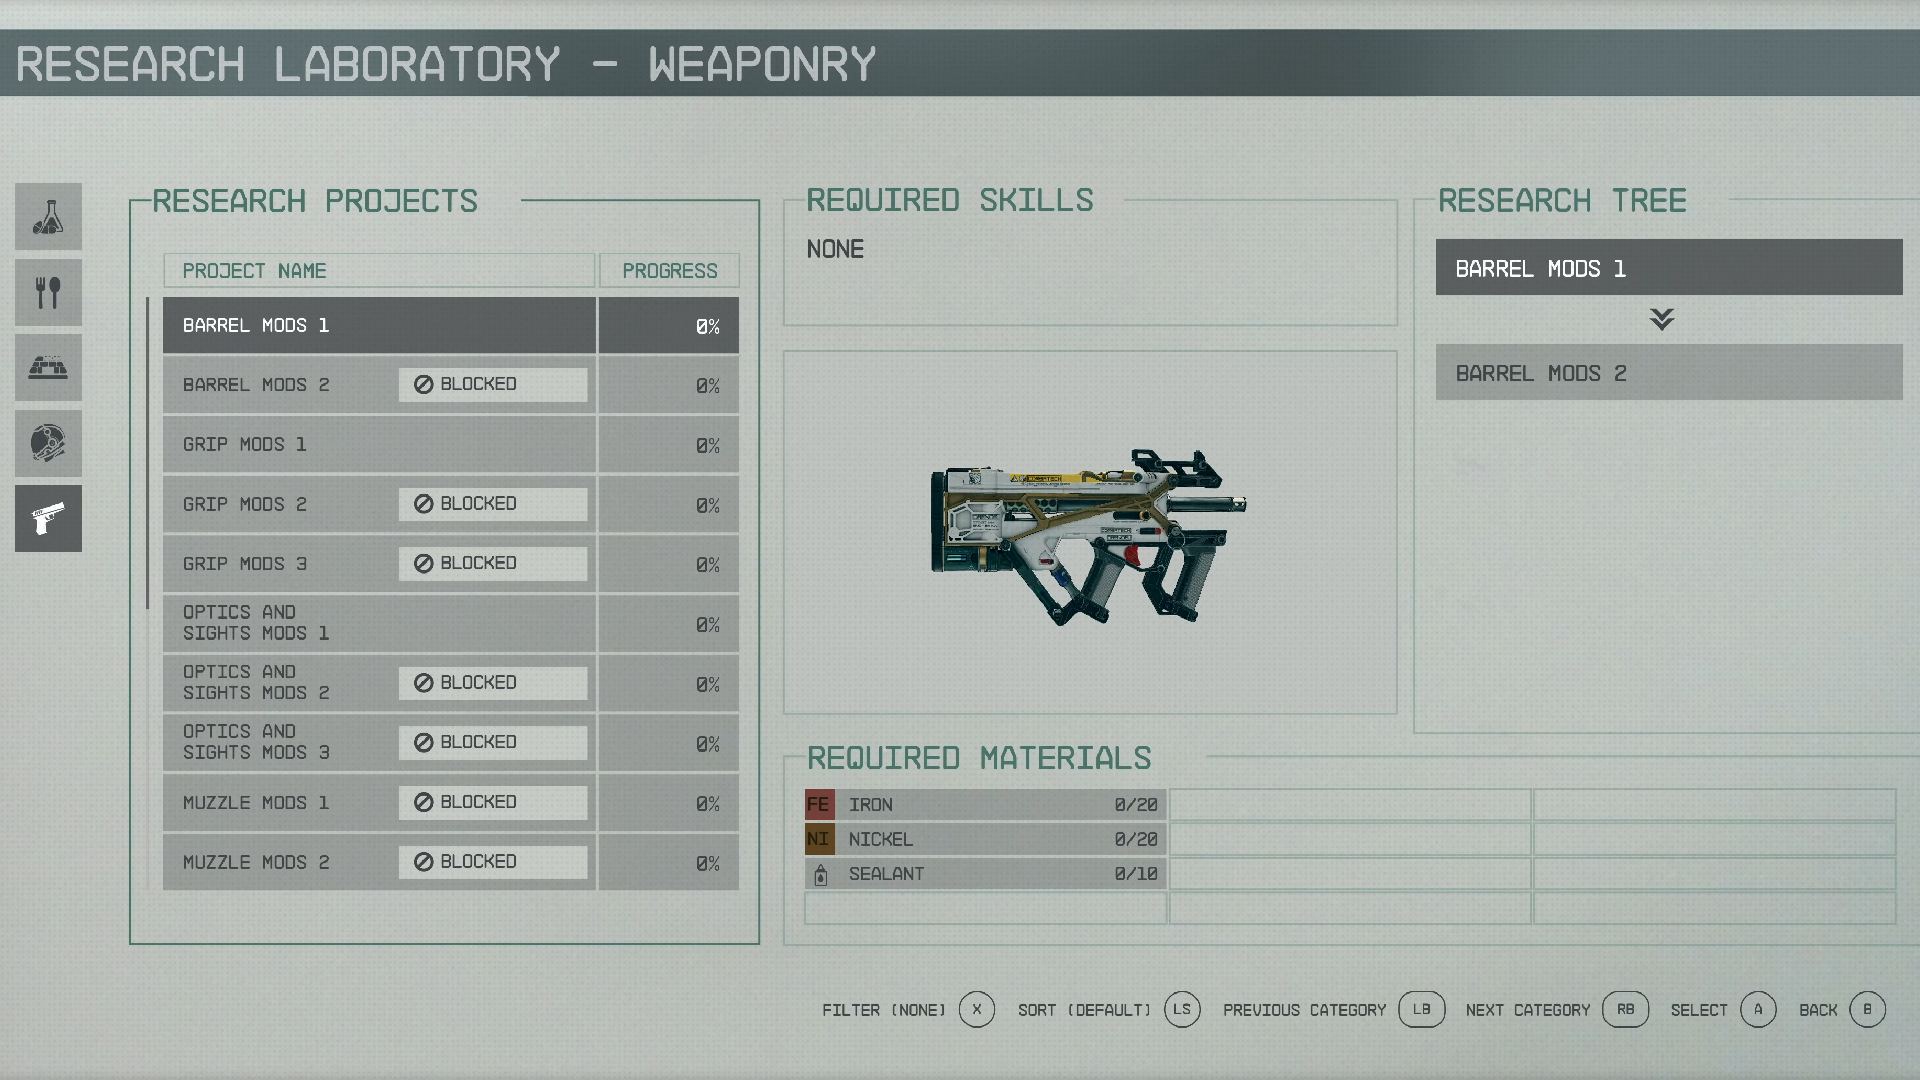 Starfield Research Projects: The menu showing the projects for weaponry can be seen.